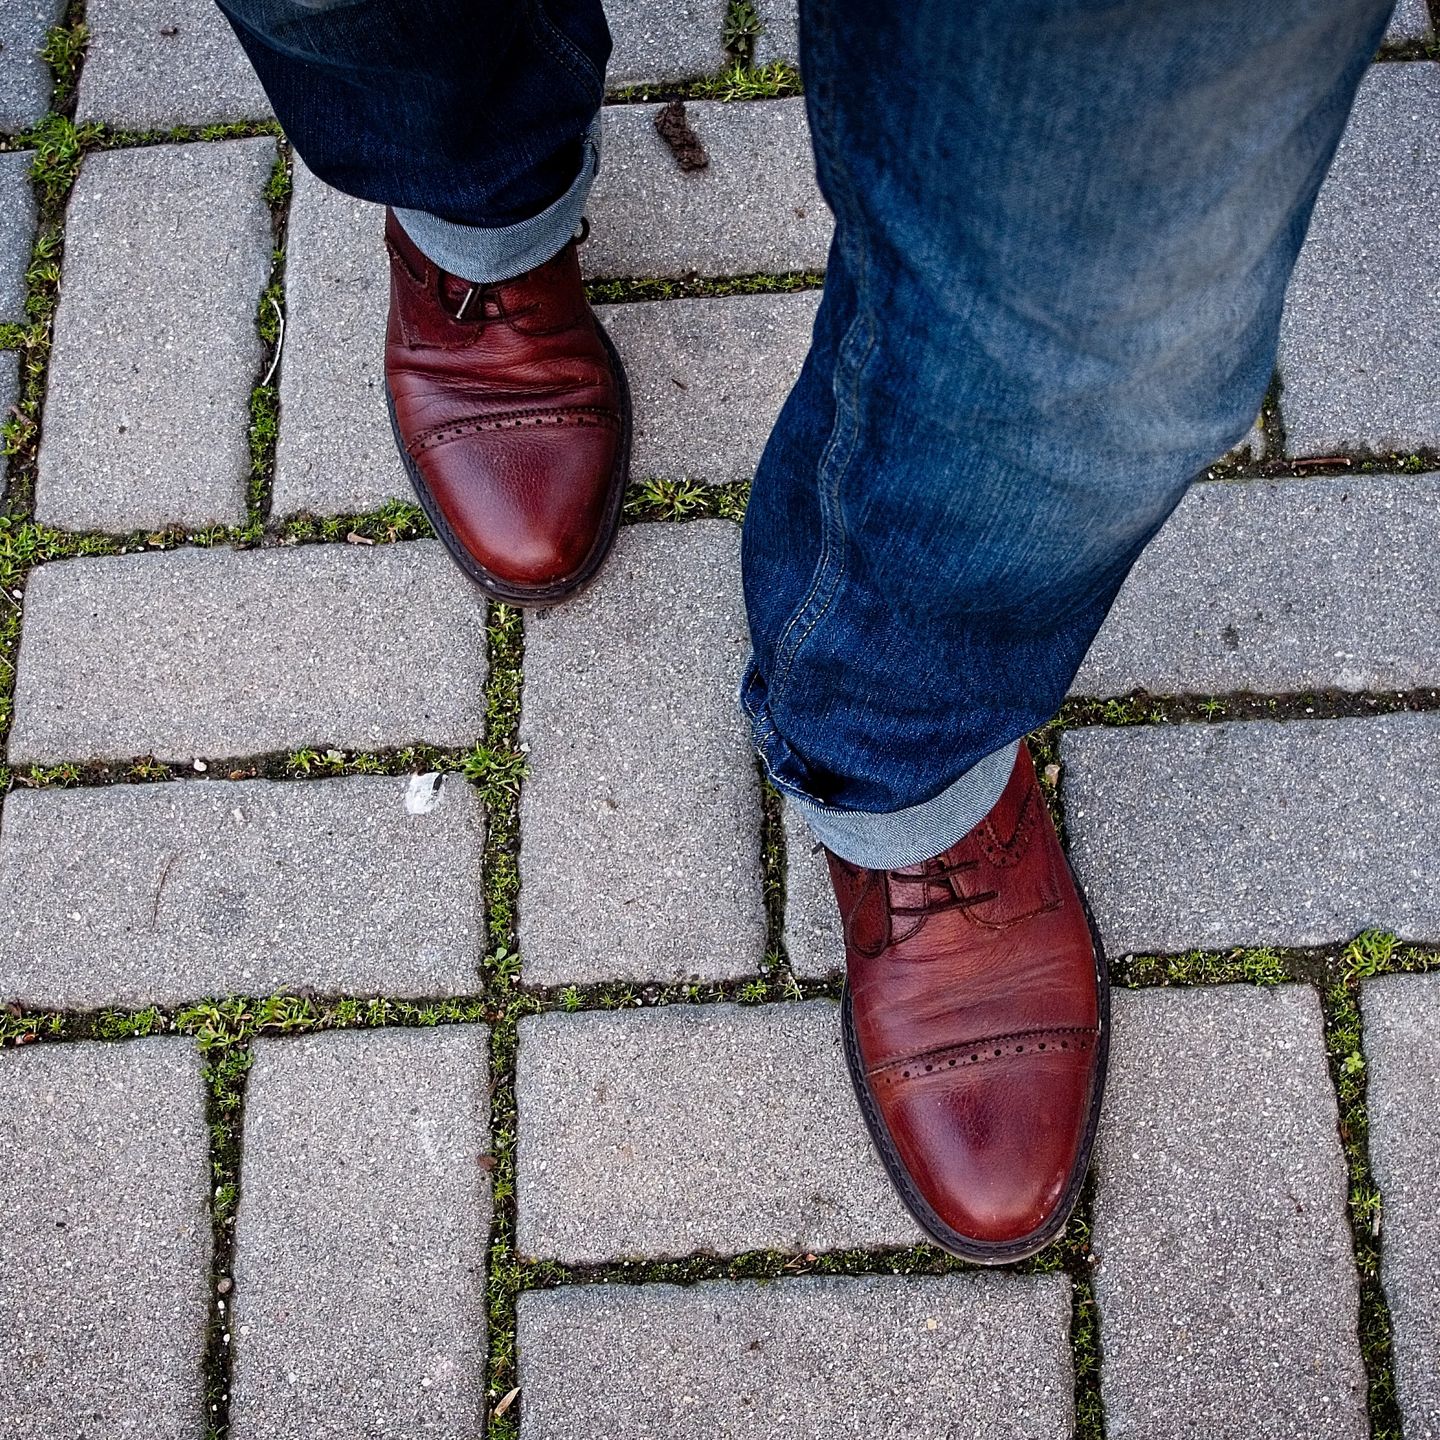 a person wearing a pair of brown shoes standing on a brick sidewalk​​​​‌﻿‍﻿​‍​‍‌‍﻿﻿‌﻿​‍‌‍‍‌‌‍‌﻿‌‍‍‌‌‍﻿‍​‍​‍​﻿‍‍​‍​‍‌﻿​﻿‌‍​‌‌‍﻿‍‌‍‍‌‌﻿‌​‌﻿‍‌​‍﻿‍‌‍‍‌‌‍﻿﻿​‍​‍​‍﻿​​‍​‍‌‍‍​‌﻿​‍‌‍‌‌‌‍‌‍​‍​‍​﻿‍‍​‍​‍‌‍‍​‌﻿‌​‌﻿‌​‌﻿​​​﻿‍‍​‍﻿﻿​‍﻿﻿‌‍﻿​‌‍﻿﻿‌‍​﻿‌‍​‌‌‍﻿​‌‍‍​‌‍﻿﻿‌﻿​﻿‌﻿‌​​﻿‍‍​﻿​﻿​﻿​﻿​﻿​﻿​﻿​﻿​‍﻿﻿‌‍‍‌‌‍﻿‍‌﻿‌​‌‍‌‌‌‍﻿‍‌﻿‌​​‍﻿﻿‌‍‌‌‌‍‌​‌‍‍‌‌﻿‌​​‍﻿﻿‌‍﻿‌‌‍﻿﻿‌‍‌​‌‍‌‌​﻿﻿‌‌﻿​​‌﻿​‍‌‍‌‌‌﻿​﻿‌‍‌‌‌‍﻿‍‌﻿‌​‌‍​‌‌﻿‌​‌‍‍‌‌‍﻿﻿‌‍﻿‍​﻿‍﻿‌‍‍‌‌‍‌​​﻿﻿‌​﻿‌﻿‌‍​‍​﻿‌‌‌‍​‍‌‍‌‍‌‍‌​​﻿‌‍‌‍‌‌​‍﻿‌‌‍‌‌​﻿‌​​﻿​​​﻿​‍​‍﻿‌​﻿‌​​﻿​‍​﻿‍‌​﻿‌﻿​‍﻿‌‌‍​‍​﻿‍​‌‍​‌‌‍​﻿​‍﻿‌​﻿​﻿​﻿‌​‌‍​‍​﻿‌‌​﻿​​​﻿‌​​﻿​‌​﻿‌‍‌‍‌​​﻿‍​‌‍‌​‌‍​﻿​﻿‍﻿‌﻿‌​‌﻿‍‌‌﻿​​‌‍‌‌​﻿﻿‌‌﻿​﻿‌‍‍​‌‍﻿﻿‌‍‌‌​﻿‍﻿‌﻿​​‌‍​‌‌﻿‌​‌‍‍​​﻿﻿‌‌‍﻿‌‌‍‌‌‌‍‌​‌‍‍‌‌‍​‌​‍‌‌​﻿‌‌‌​​‍‌‌﻿﻿‌‍‍﻿‌‍‌‌‌﻿‍‌​‍‌‌​﻿​﻿‌​‌​​‍‌‌​﻿​﻿‌​‌​​‍‌‌​﻿​‍​﻿​‍​﻿‌﻿​﻿‌‌‌‍‌‌​﻿‌​​﻿‌‍​﻿​​​﻿‍​​﻿​‍​﻿‌‍‌‍‌​​﻿​‍‌‍​‍​‍‌‌​﻿​‍​﻿​‍​‍‌‌​﻿‌‌‌​‌​​‍﻿‍‌‍​‌‌‍﻿​‌﻿‌​​﻿﻿﻿‌‍​‍‌‍​‌‌﻿​﻿‌‍‌‌‌‌‌‌‌﻿​‍‌‍﻿​​﻿﻿‌‌‍‍​‌﻿‌​‌﻿‌​‌﻿​​​‍‌‌​﻿​﻿‌​​‌​‍‌‌​﻿​‍‌​‌‍​‍‌‌​﻿​‍‌​‌‍‌‍﻿​‌‍﻿﻿‌‍​﻿‌‍​‌‌‍﻿​‌‍‍​‌‍﻿﻿‌﻿​﻿‌﻿‌​​‍‌‌​﻿​﻿‌​​‌​﻿​﻿​﻿​﻿​﻿​﻿​﻿​﻿​‍‌‍‌‍‍‌‌‍‌​​﻿﻿‌​﻿‌﻿‌‍​‍​﻿‌‌‌‍​‍‌‍‌‍‌‍‌​​﻿‌‍‌‍‌‌​‍﻿‌‌‍‌‌​﻿‌​​﻿​​​﻿​‍​‍﻿‌​﻿‌​​﻿​‍​﻿‍‌​﻿‌﻿​‍﻿‌‌‍​‍​﻿‍​‌‍​‌‌‍​﻿​‍﻿‌​﻿​﻿​﻿‌​‌‍​‍​﻿‌‌​﻿​​​﻿‌​​﻿​‌​﻿‌‍‌‍‌​​﻿‍​‌‍‌​‌‍​﻿​‍‌‍‌﻿‌​‌﻿‍‌‌﻿​​‌‍‌‌​﻿﻿‌‌﻿​﻿‌‍‍​‌‍﻿﻿‌‍‌‌​‍‌‍‌﻿​​‌‍​‌‌﻿‌​‌‍‍​​﻿﻿‌‌‍﻿‌‌‍‌‌‌‍‌​‌‍‍‌‌‍​‌​‍‌‌​﻿‌‌‌​​‍‌‌﻿﻿‌‍‍﻿‌‍‌‌‌﻿‍‌​‍‌‌​﻿​﻿‌​‌​​‍‌‌​﻿​﻿‌​‌​​‍‌‌​﻿​‍​﻿​‍​﻿‌﻿​﻿‌‌‌‍‌‌​﻿‌​​﻿‌‍​﻿​​​﻿‍​​﻿​‍​﻿‌‍‌‍‌​​﻿​‍‌‍​‍​‍‌‌​﻿​‍​﻿​‍​‍‌‌​﻿‌‌‌​‌​​‍﻿‍‌‍​‌‌‍﻿​‌﻿‌​​‍​‍‌﻿﻿‌